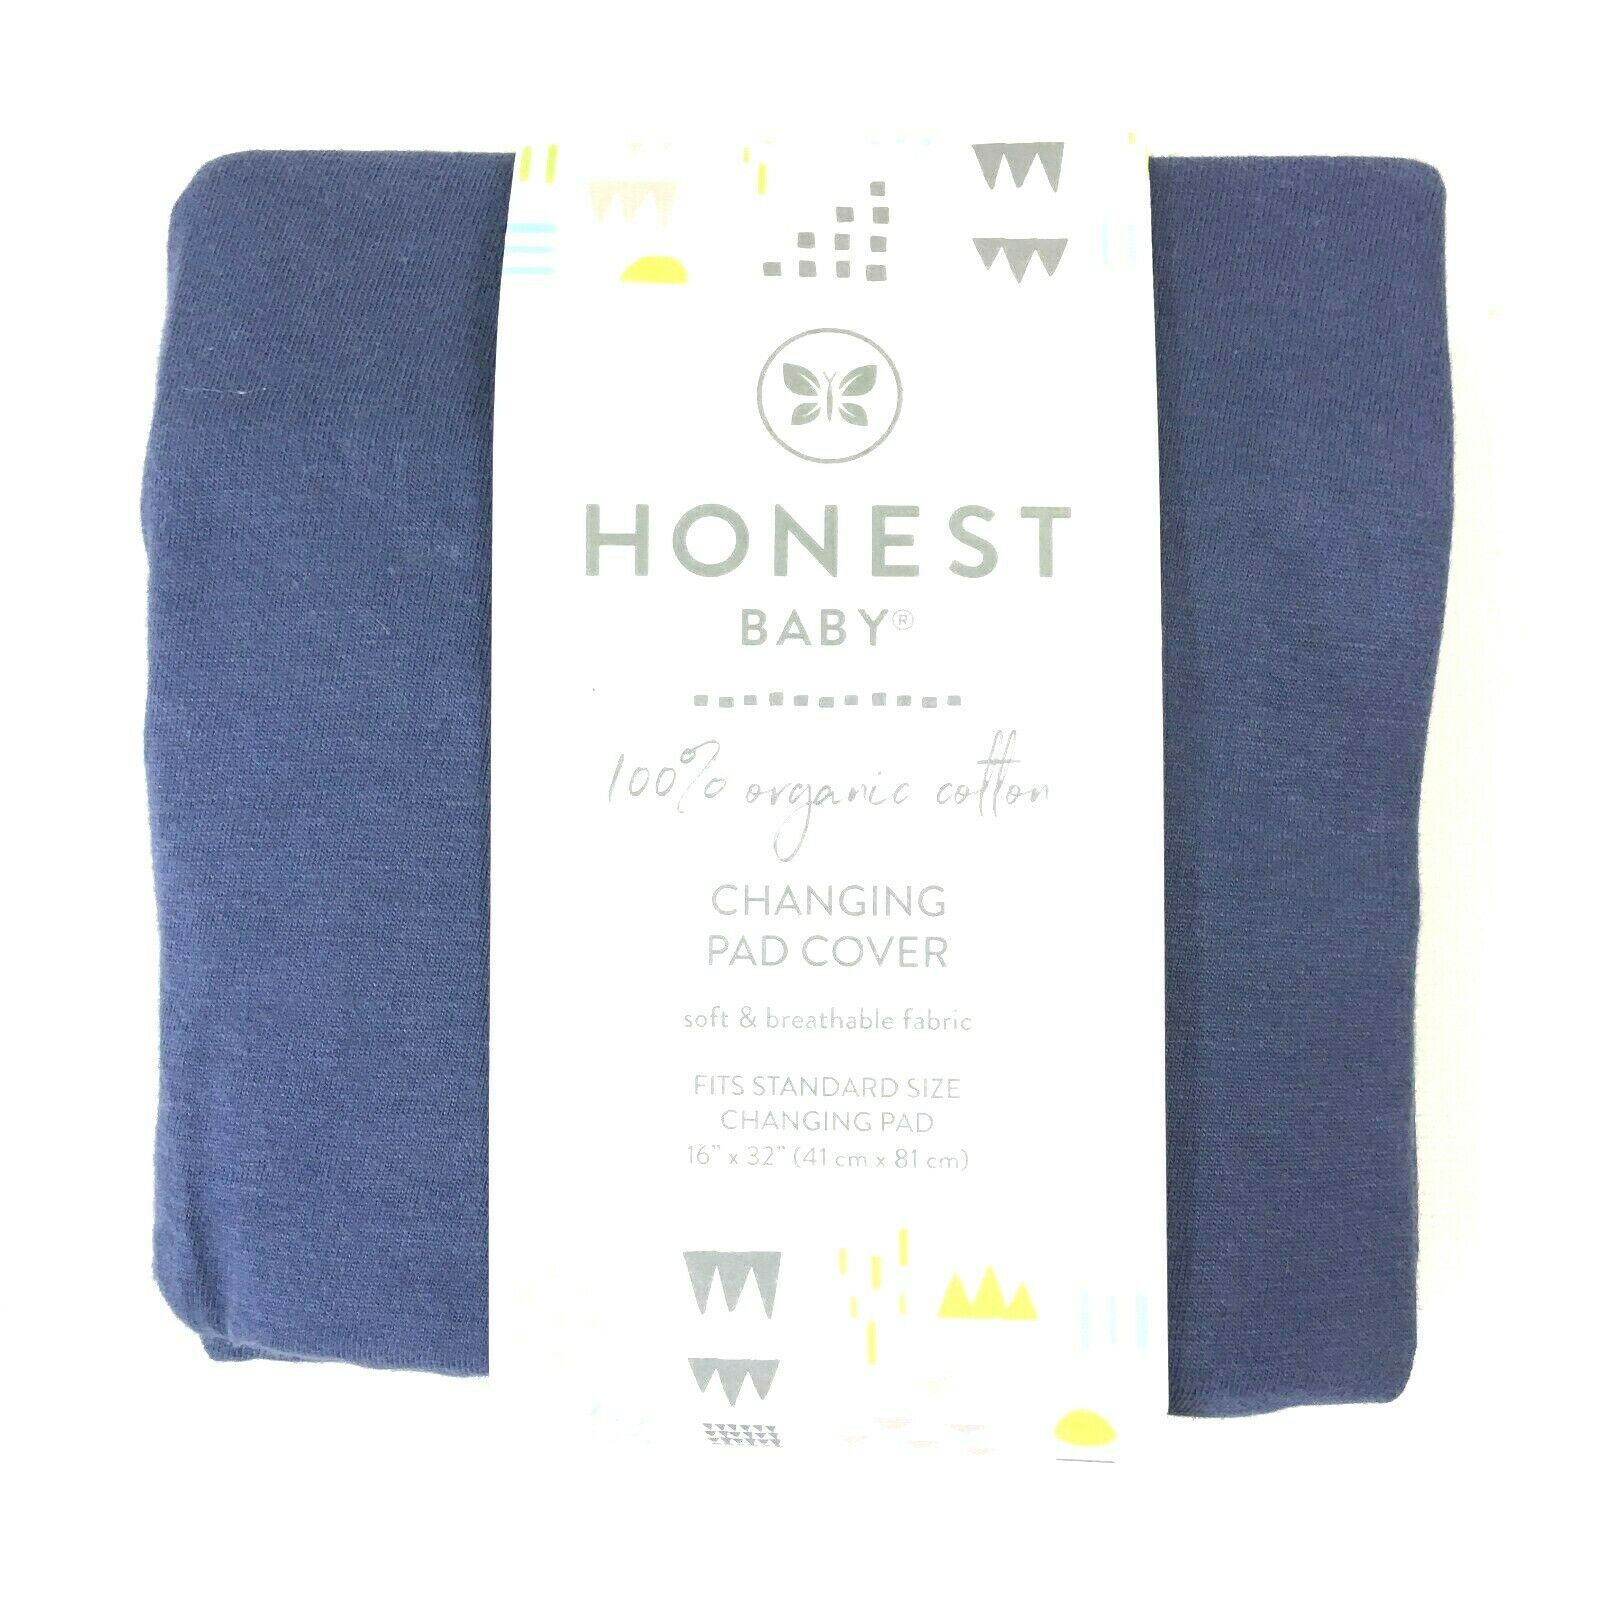 Honest Baby Organic Cotton Changing Pad Cover Navy Blue 16x32"